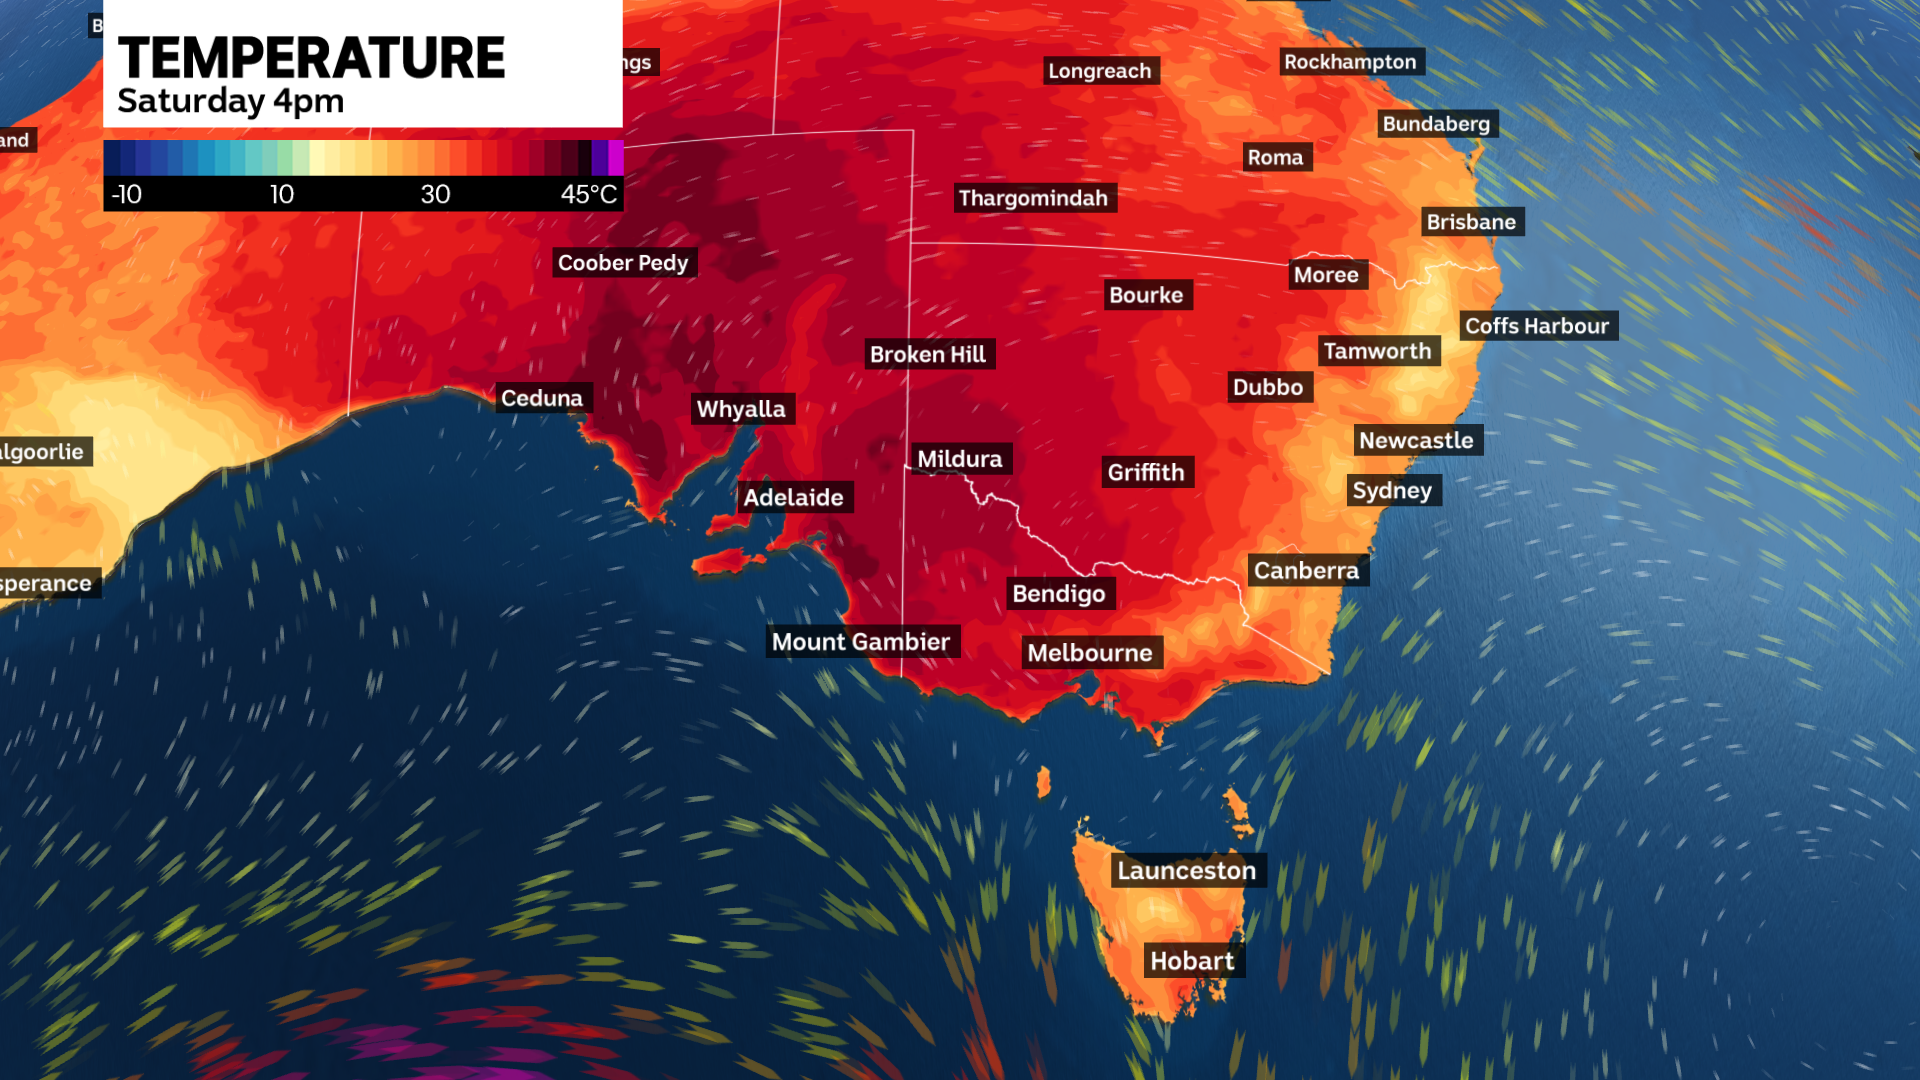 weather map showing Saturday's afternoon temperatures will reach around 40C across much of south-east Australia